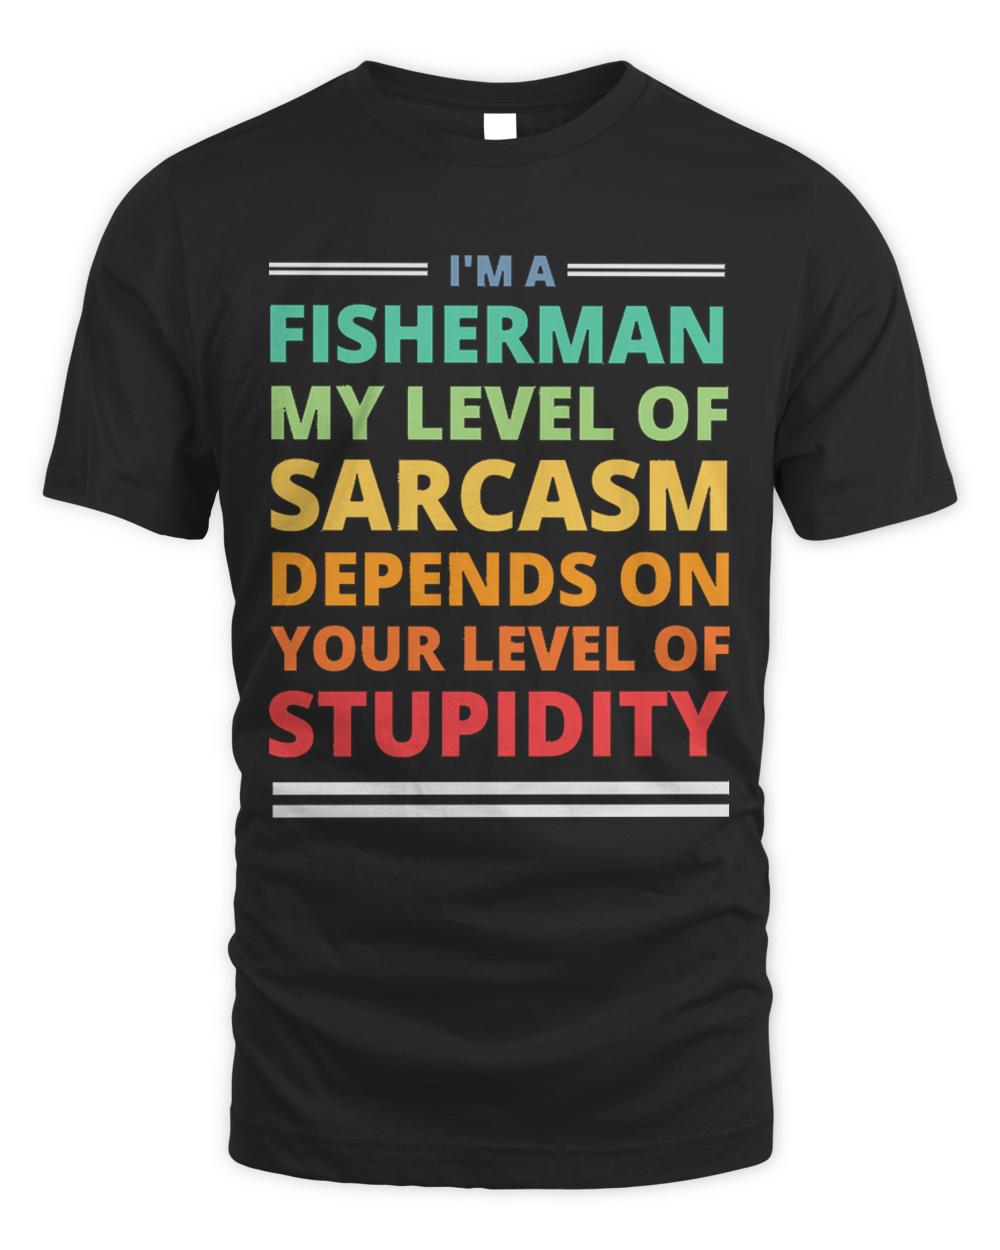 Fisherman T- Shirt I'm a Fisherman My Level of Sarcasm Depends on Your Level of Stupidity T- Shirt